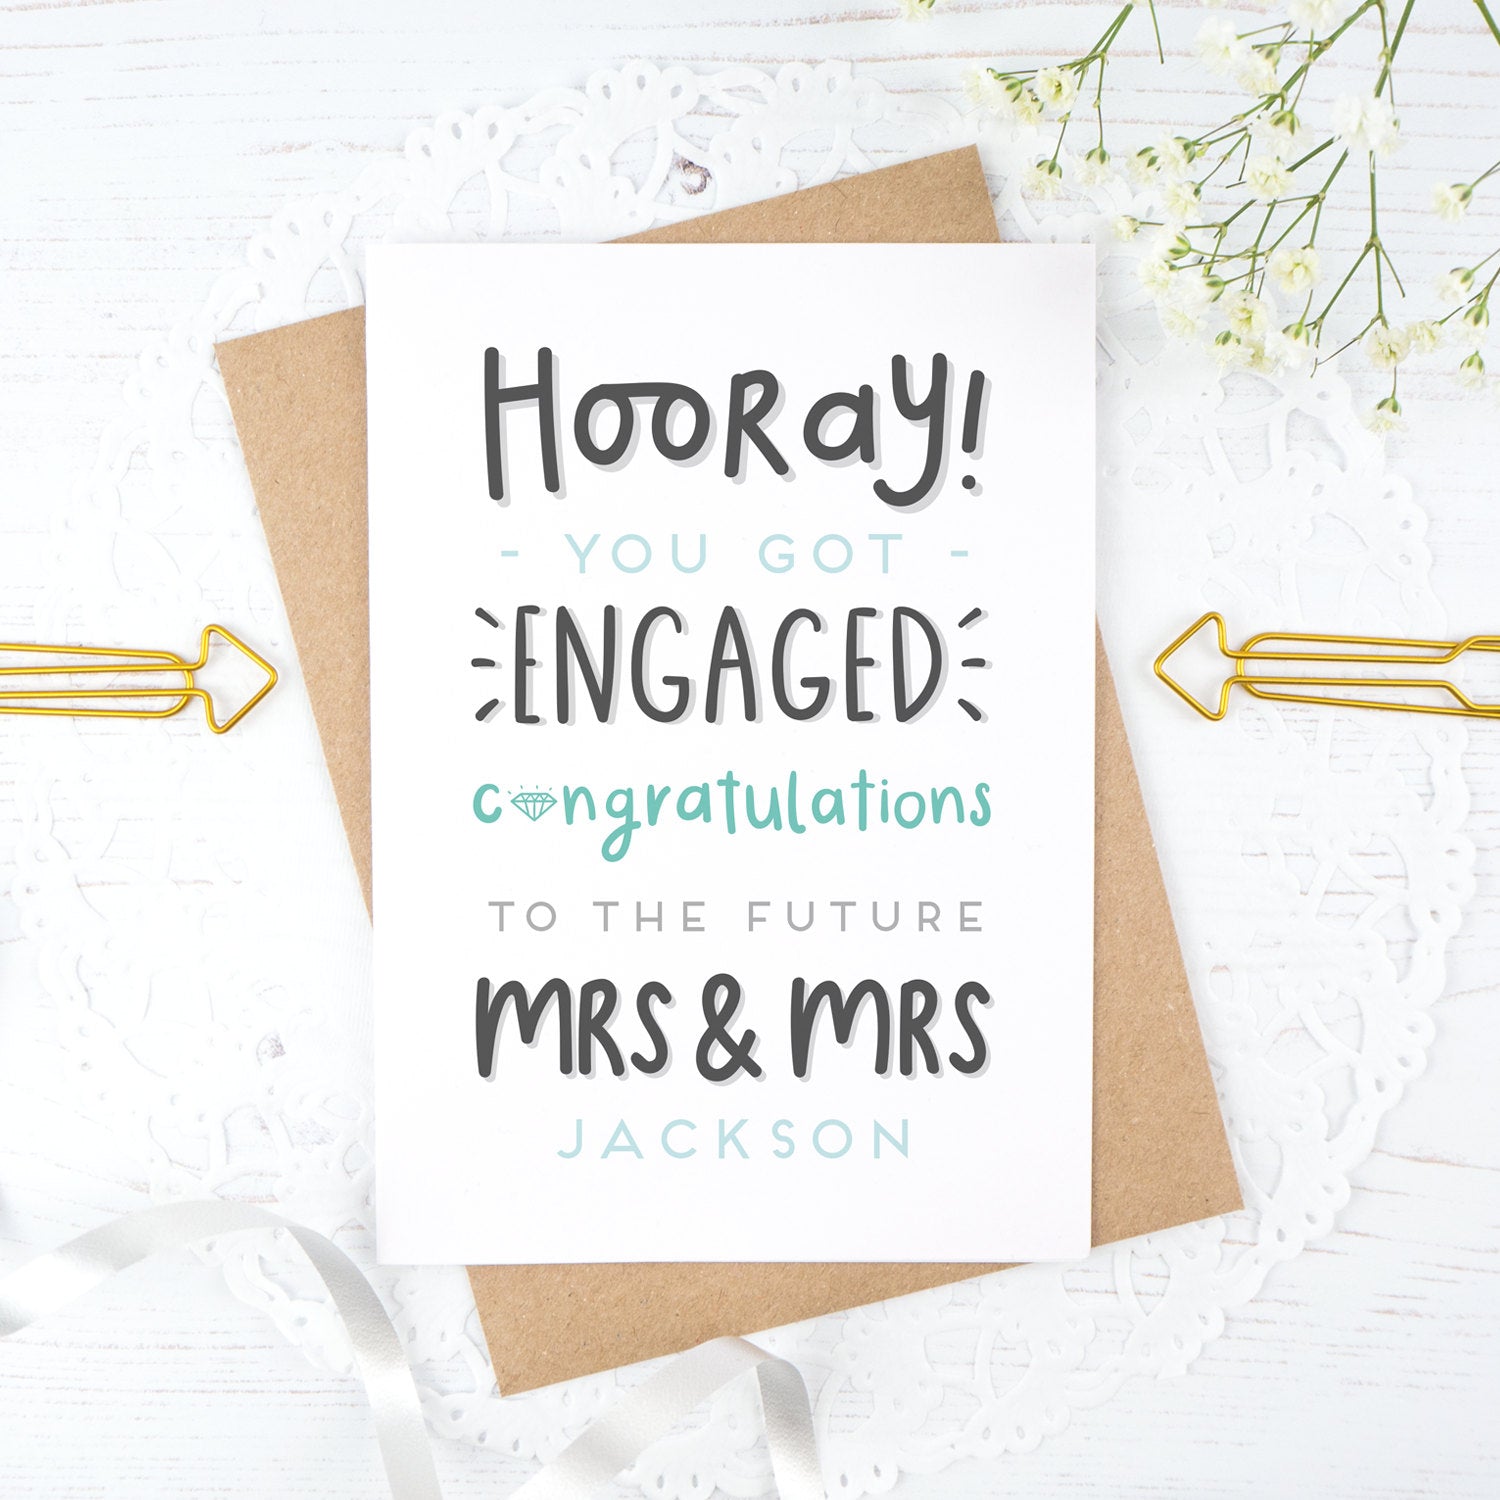 Hooray you got engaged! - Personalised Mrs & Mrs engagement card in blue